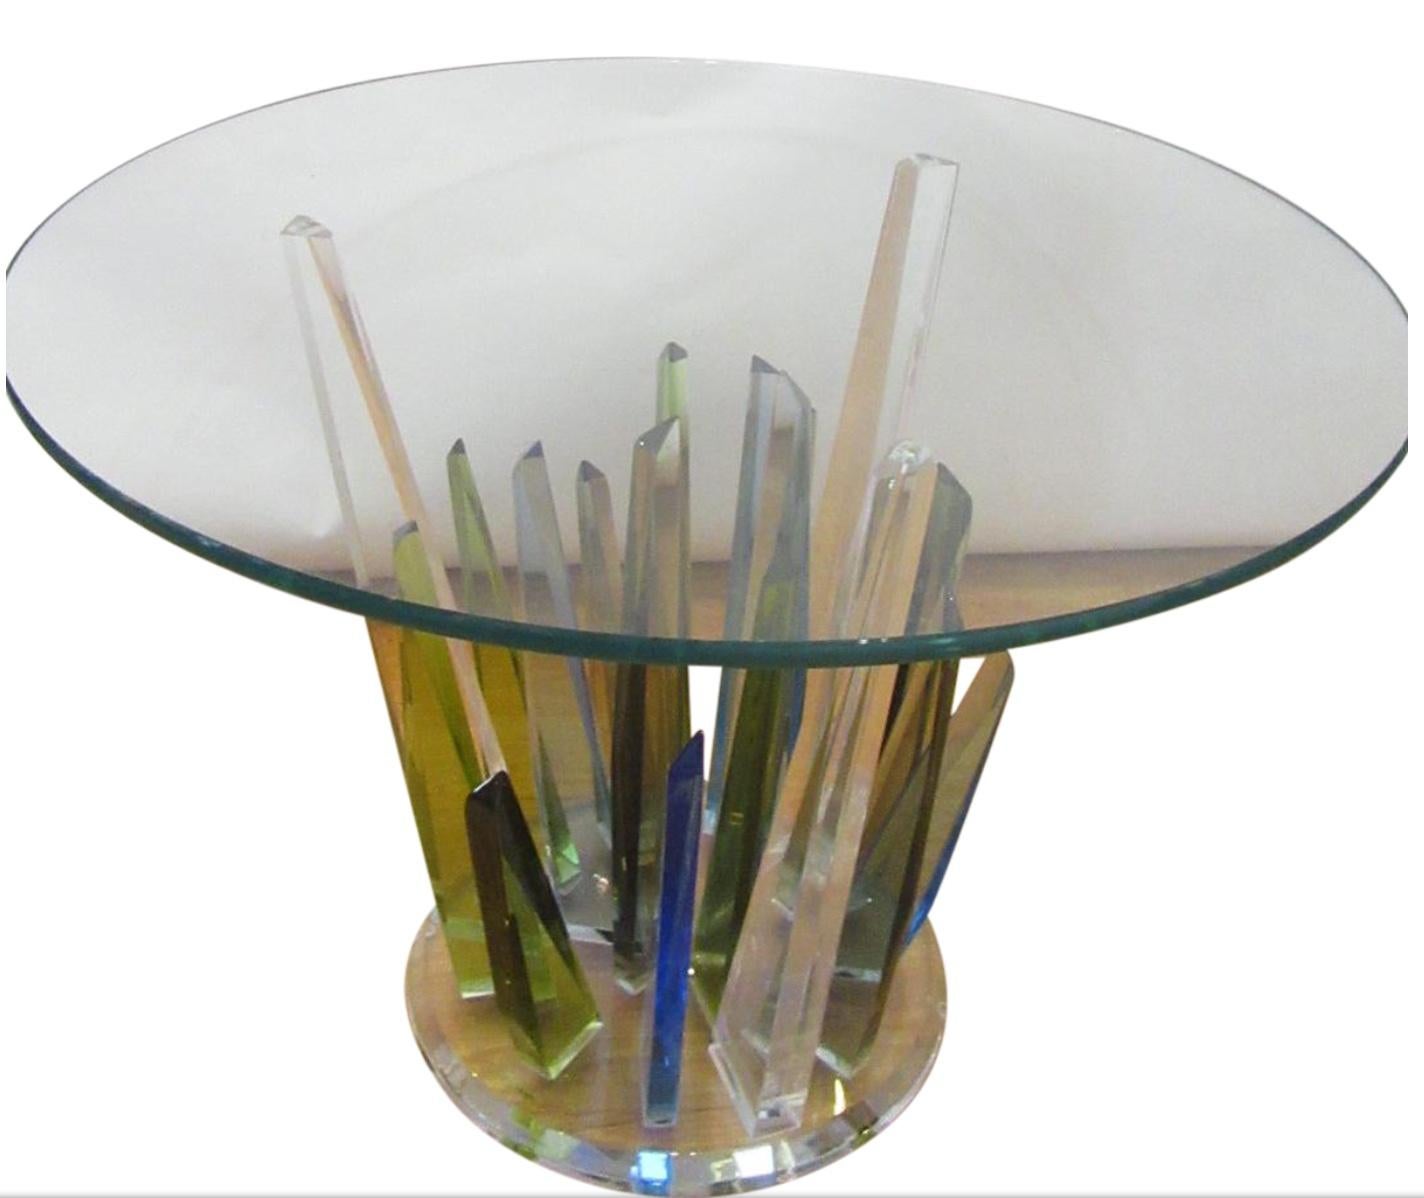 Stylish vintage Lucite coffee table with a round glass top accompanied underneath by a magnificent cool colored spectrum of blue and green Lucite sculpted to replicate stalagmites in their organic mineral form.